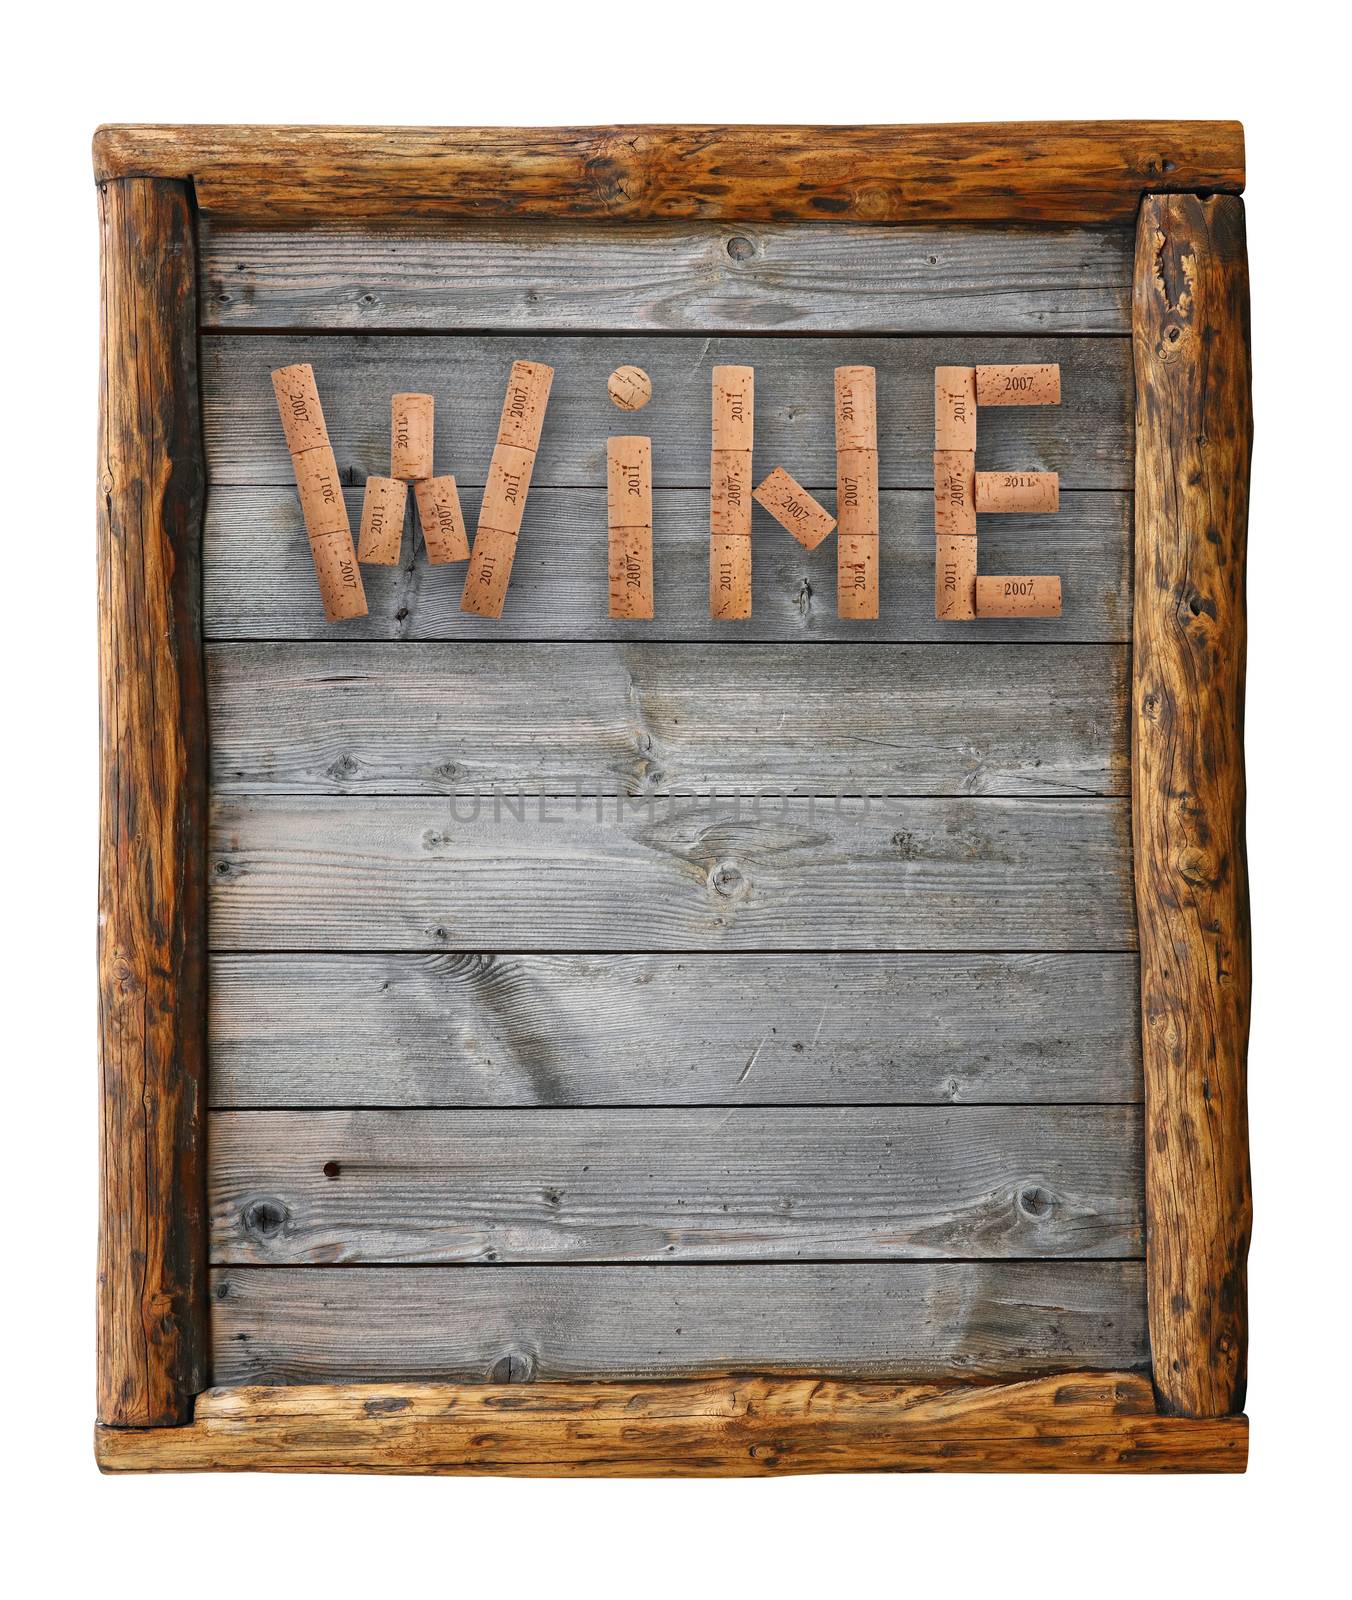 Word WINE shaped by natural wine bottle corks of different vintage years over background of old wooden planks in frame of wood logs